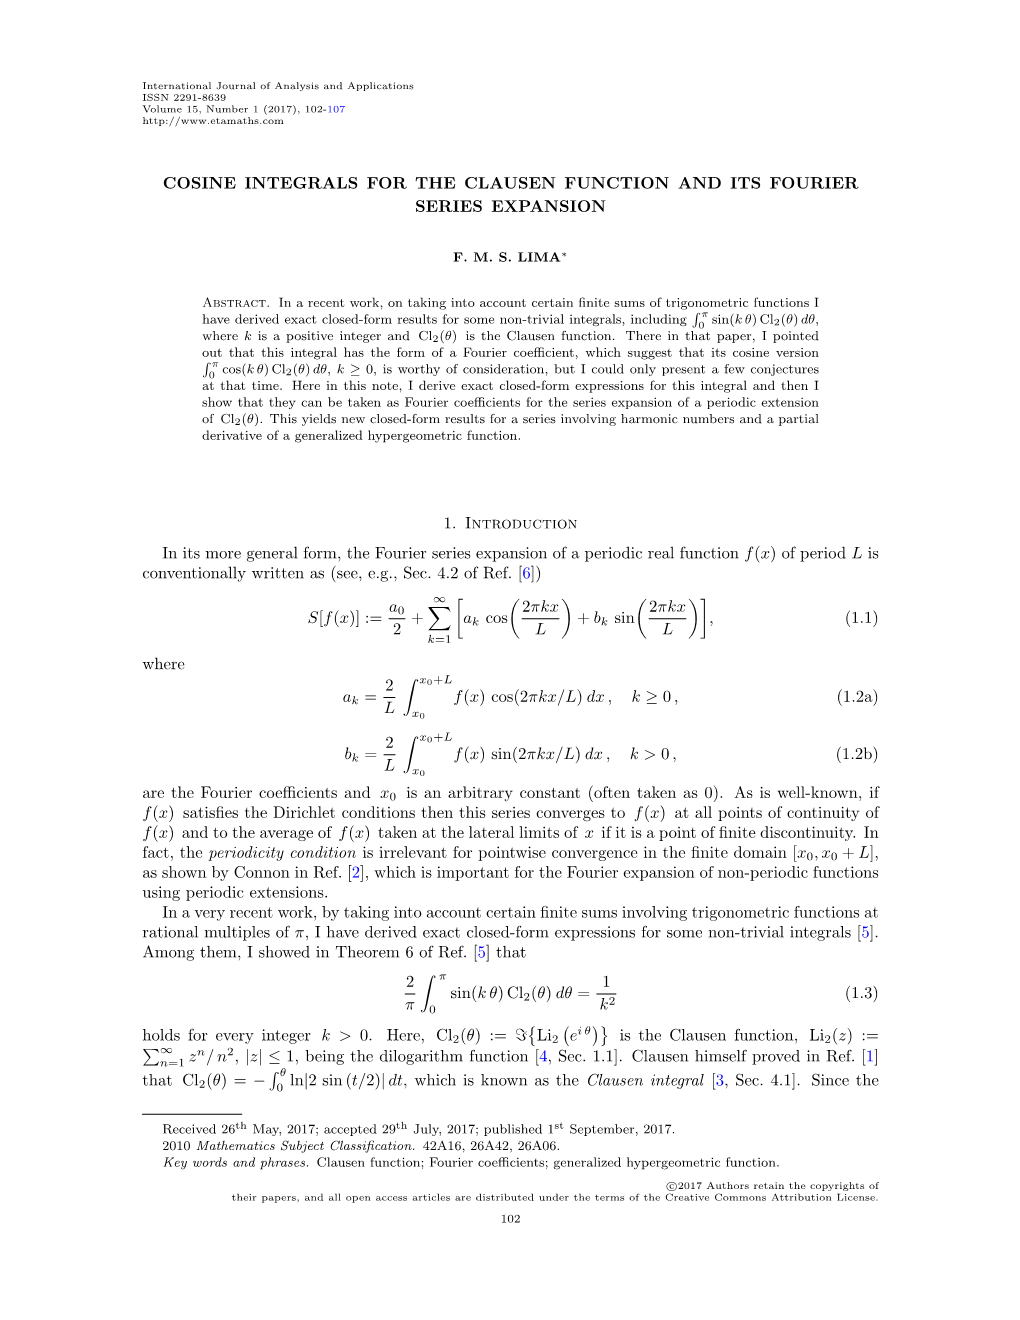 Cosine Integrals for the Clausen Function and Its Fourier Series Expansion